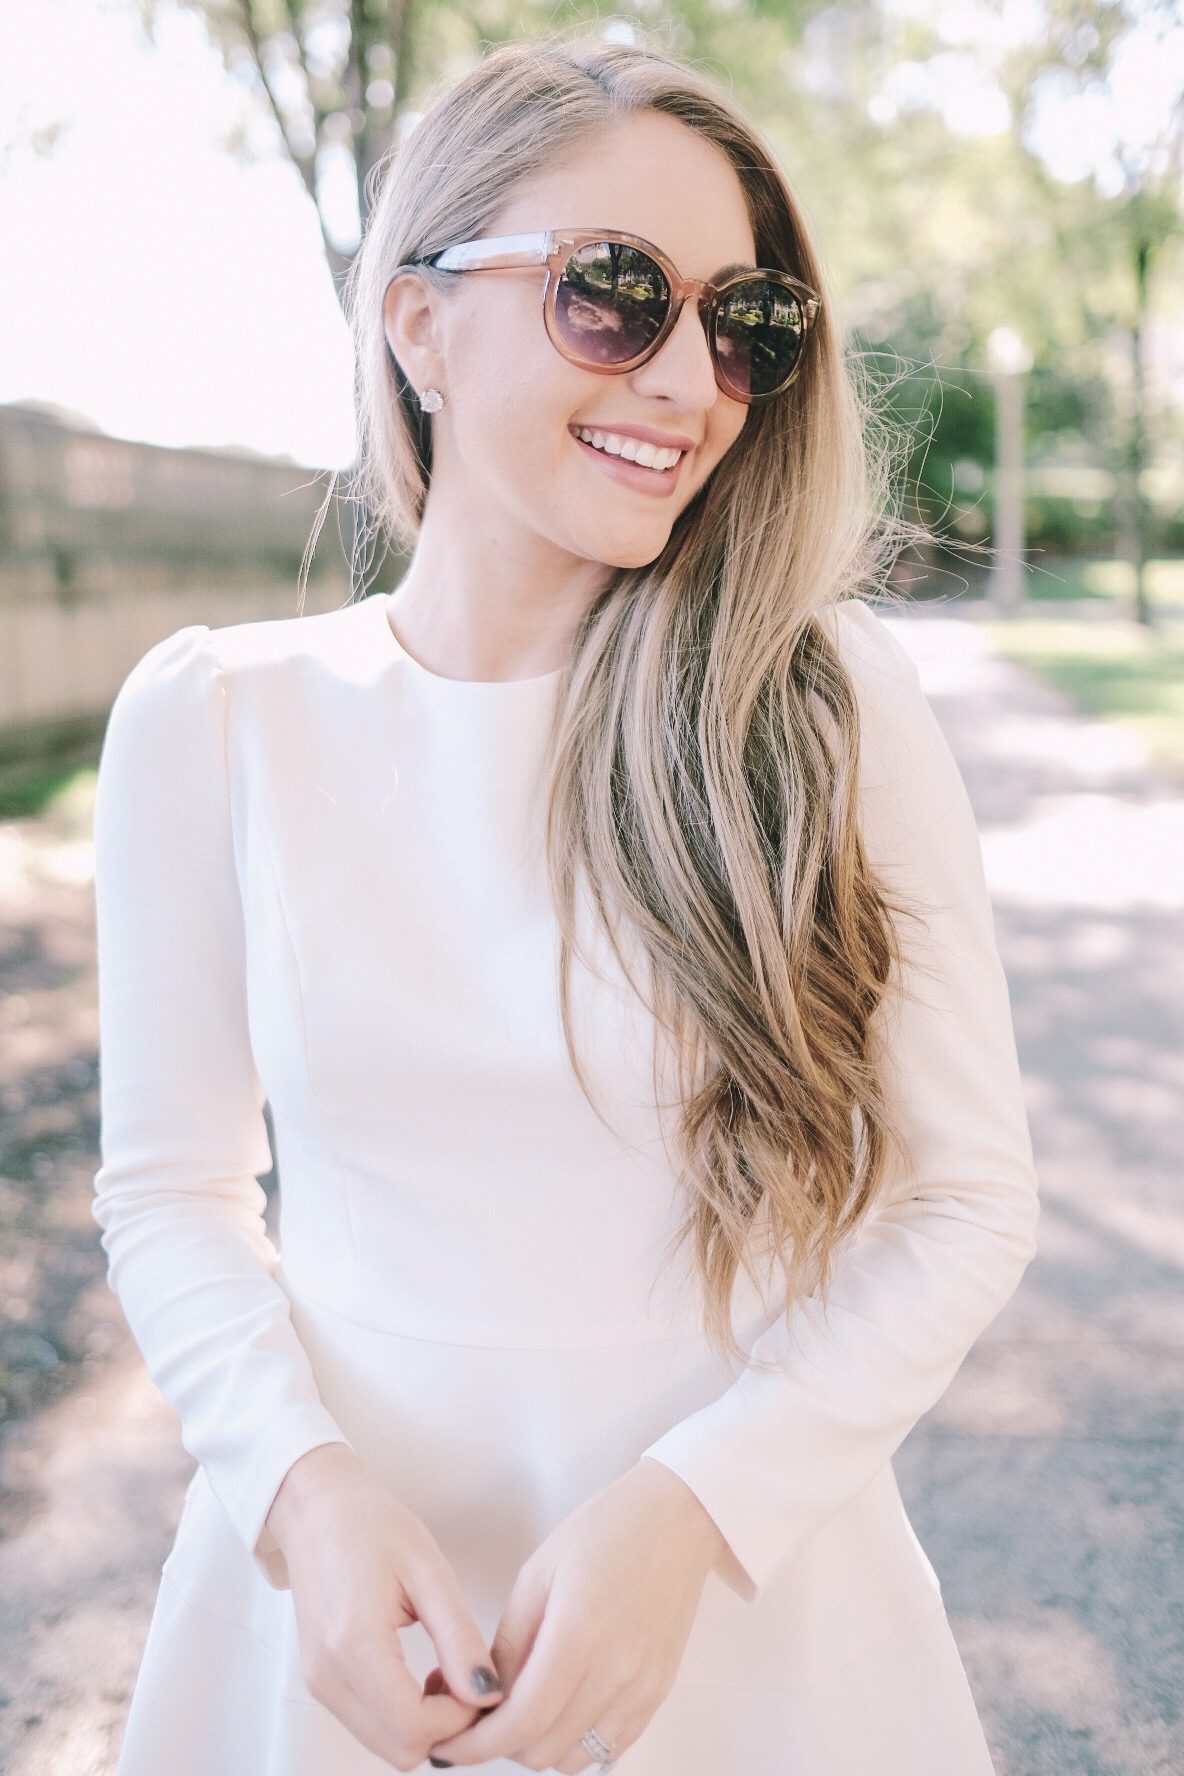 Winter whites for the bride-to-be | Miss Madeline Rose